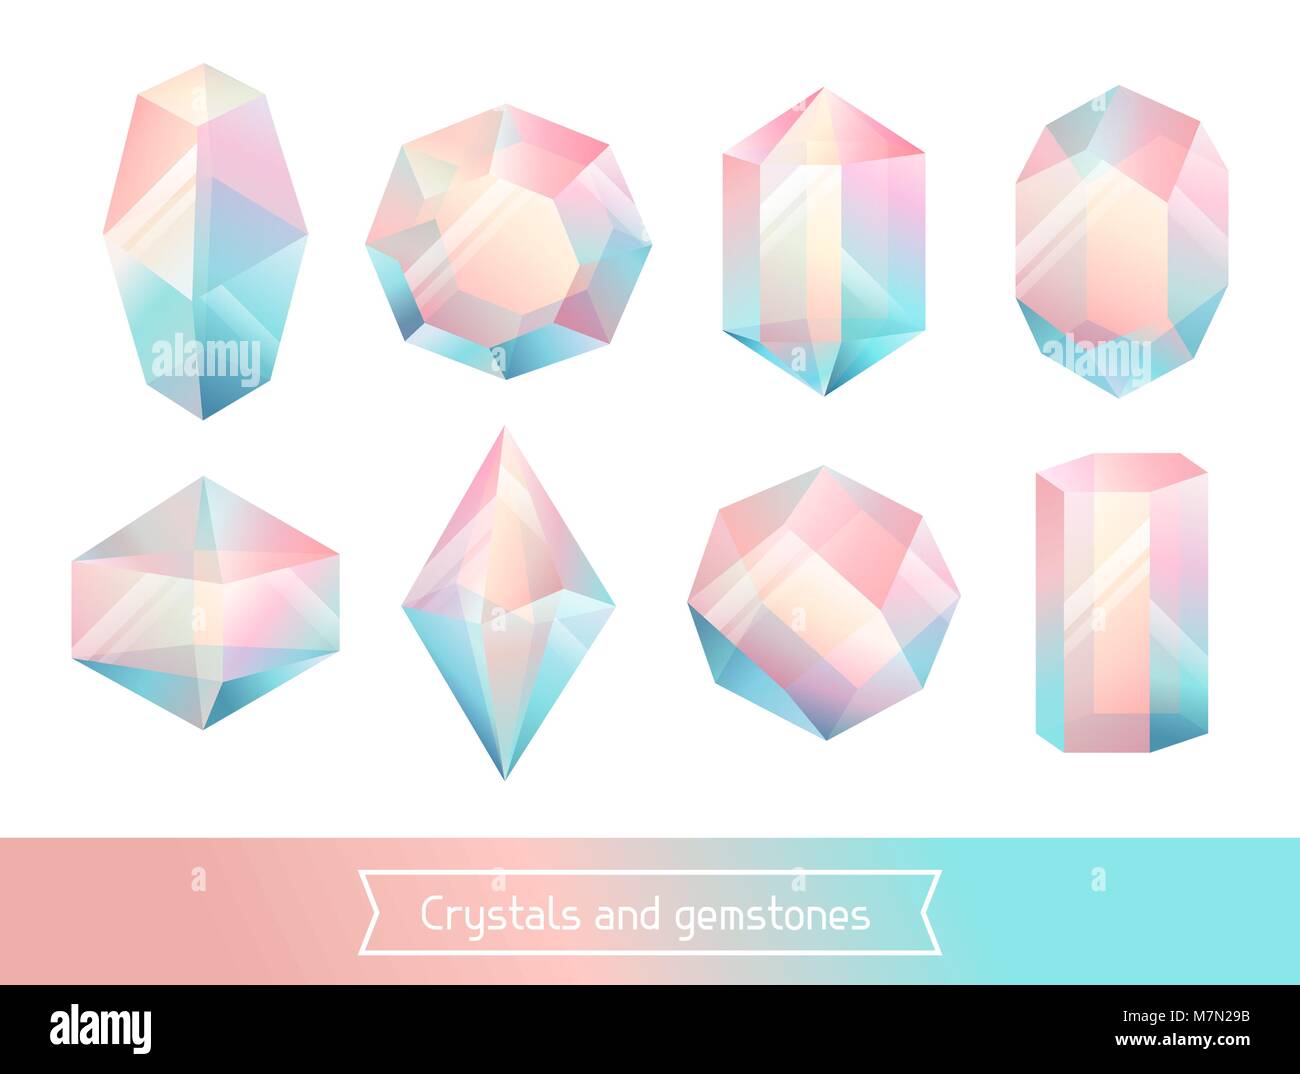 Set of geometric crystals gem and minerals Stock Vector